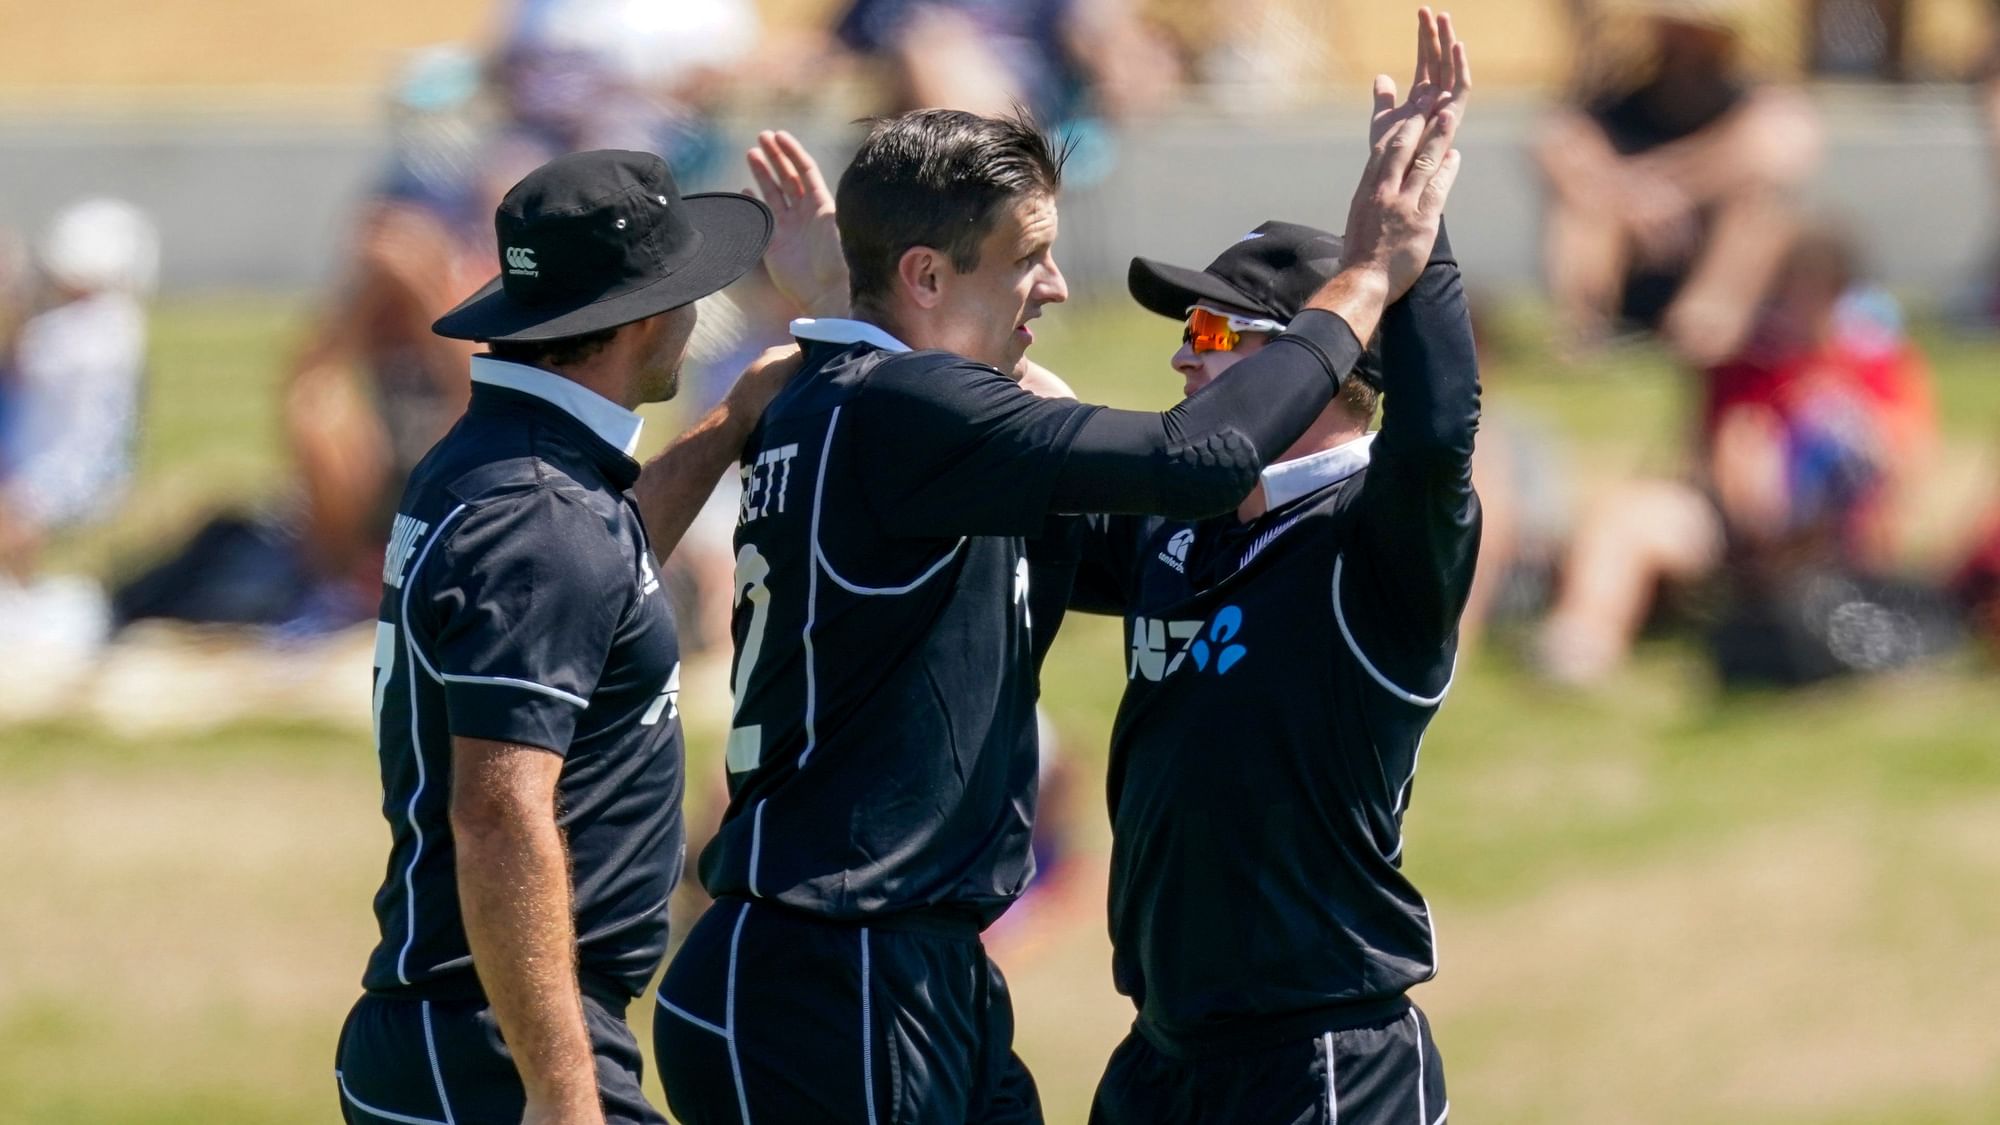 New Zealand beat India by 5 wickets in the 3rd ODI